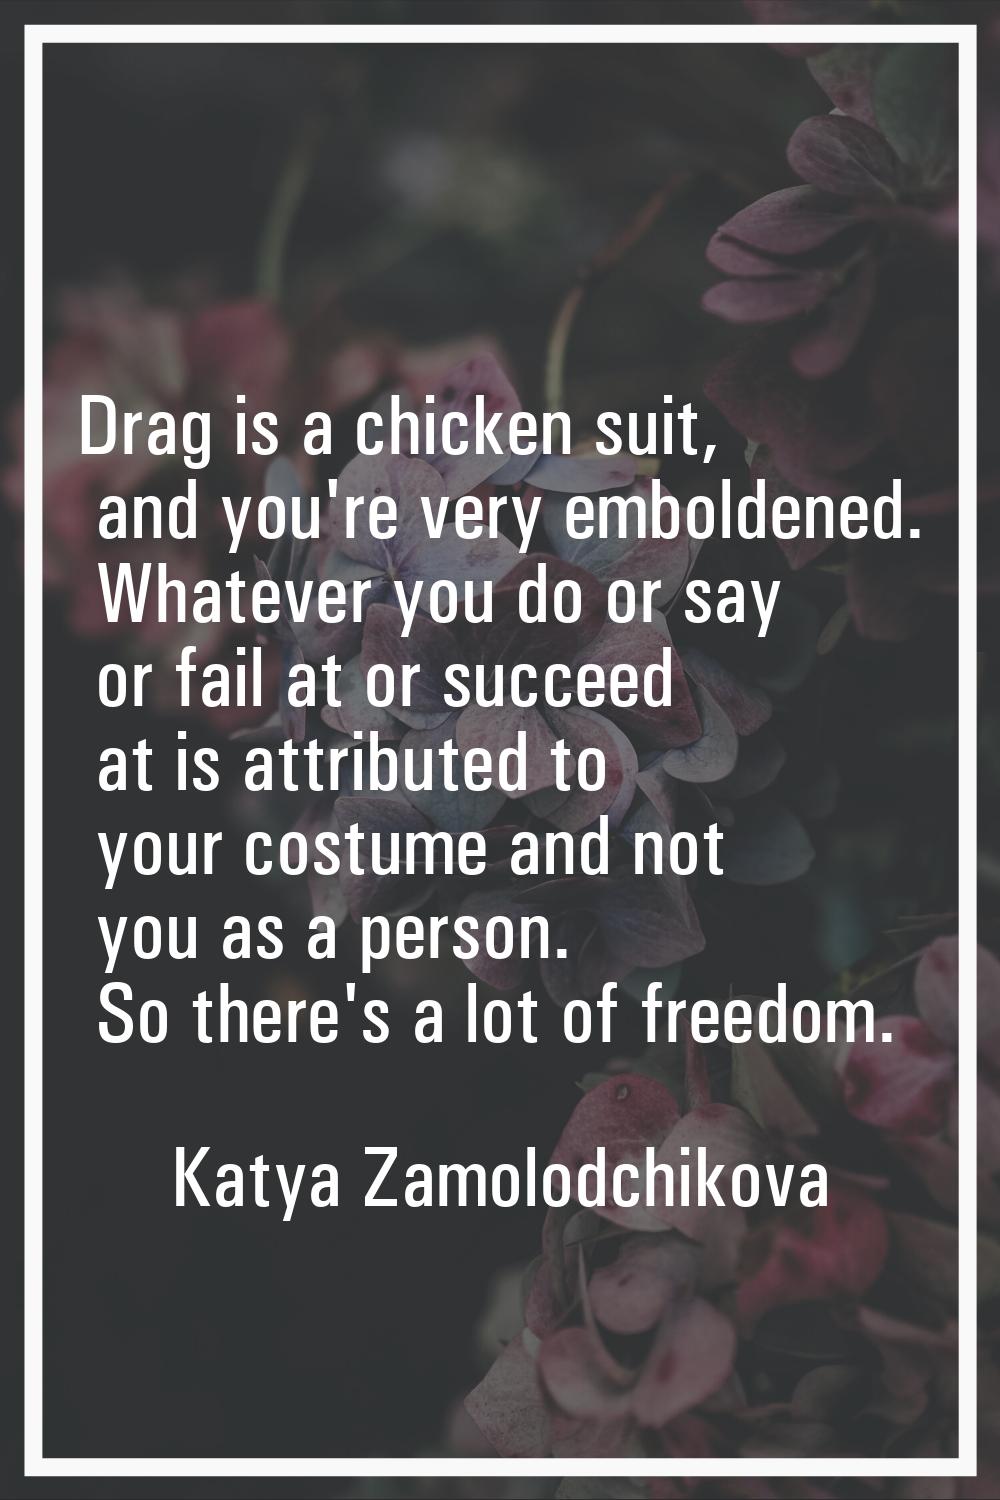 Drag is a chicken suit, and you're very emboldened. Whatever you do or say or fail at or succeed at